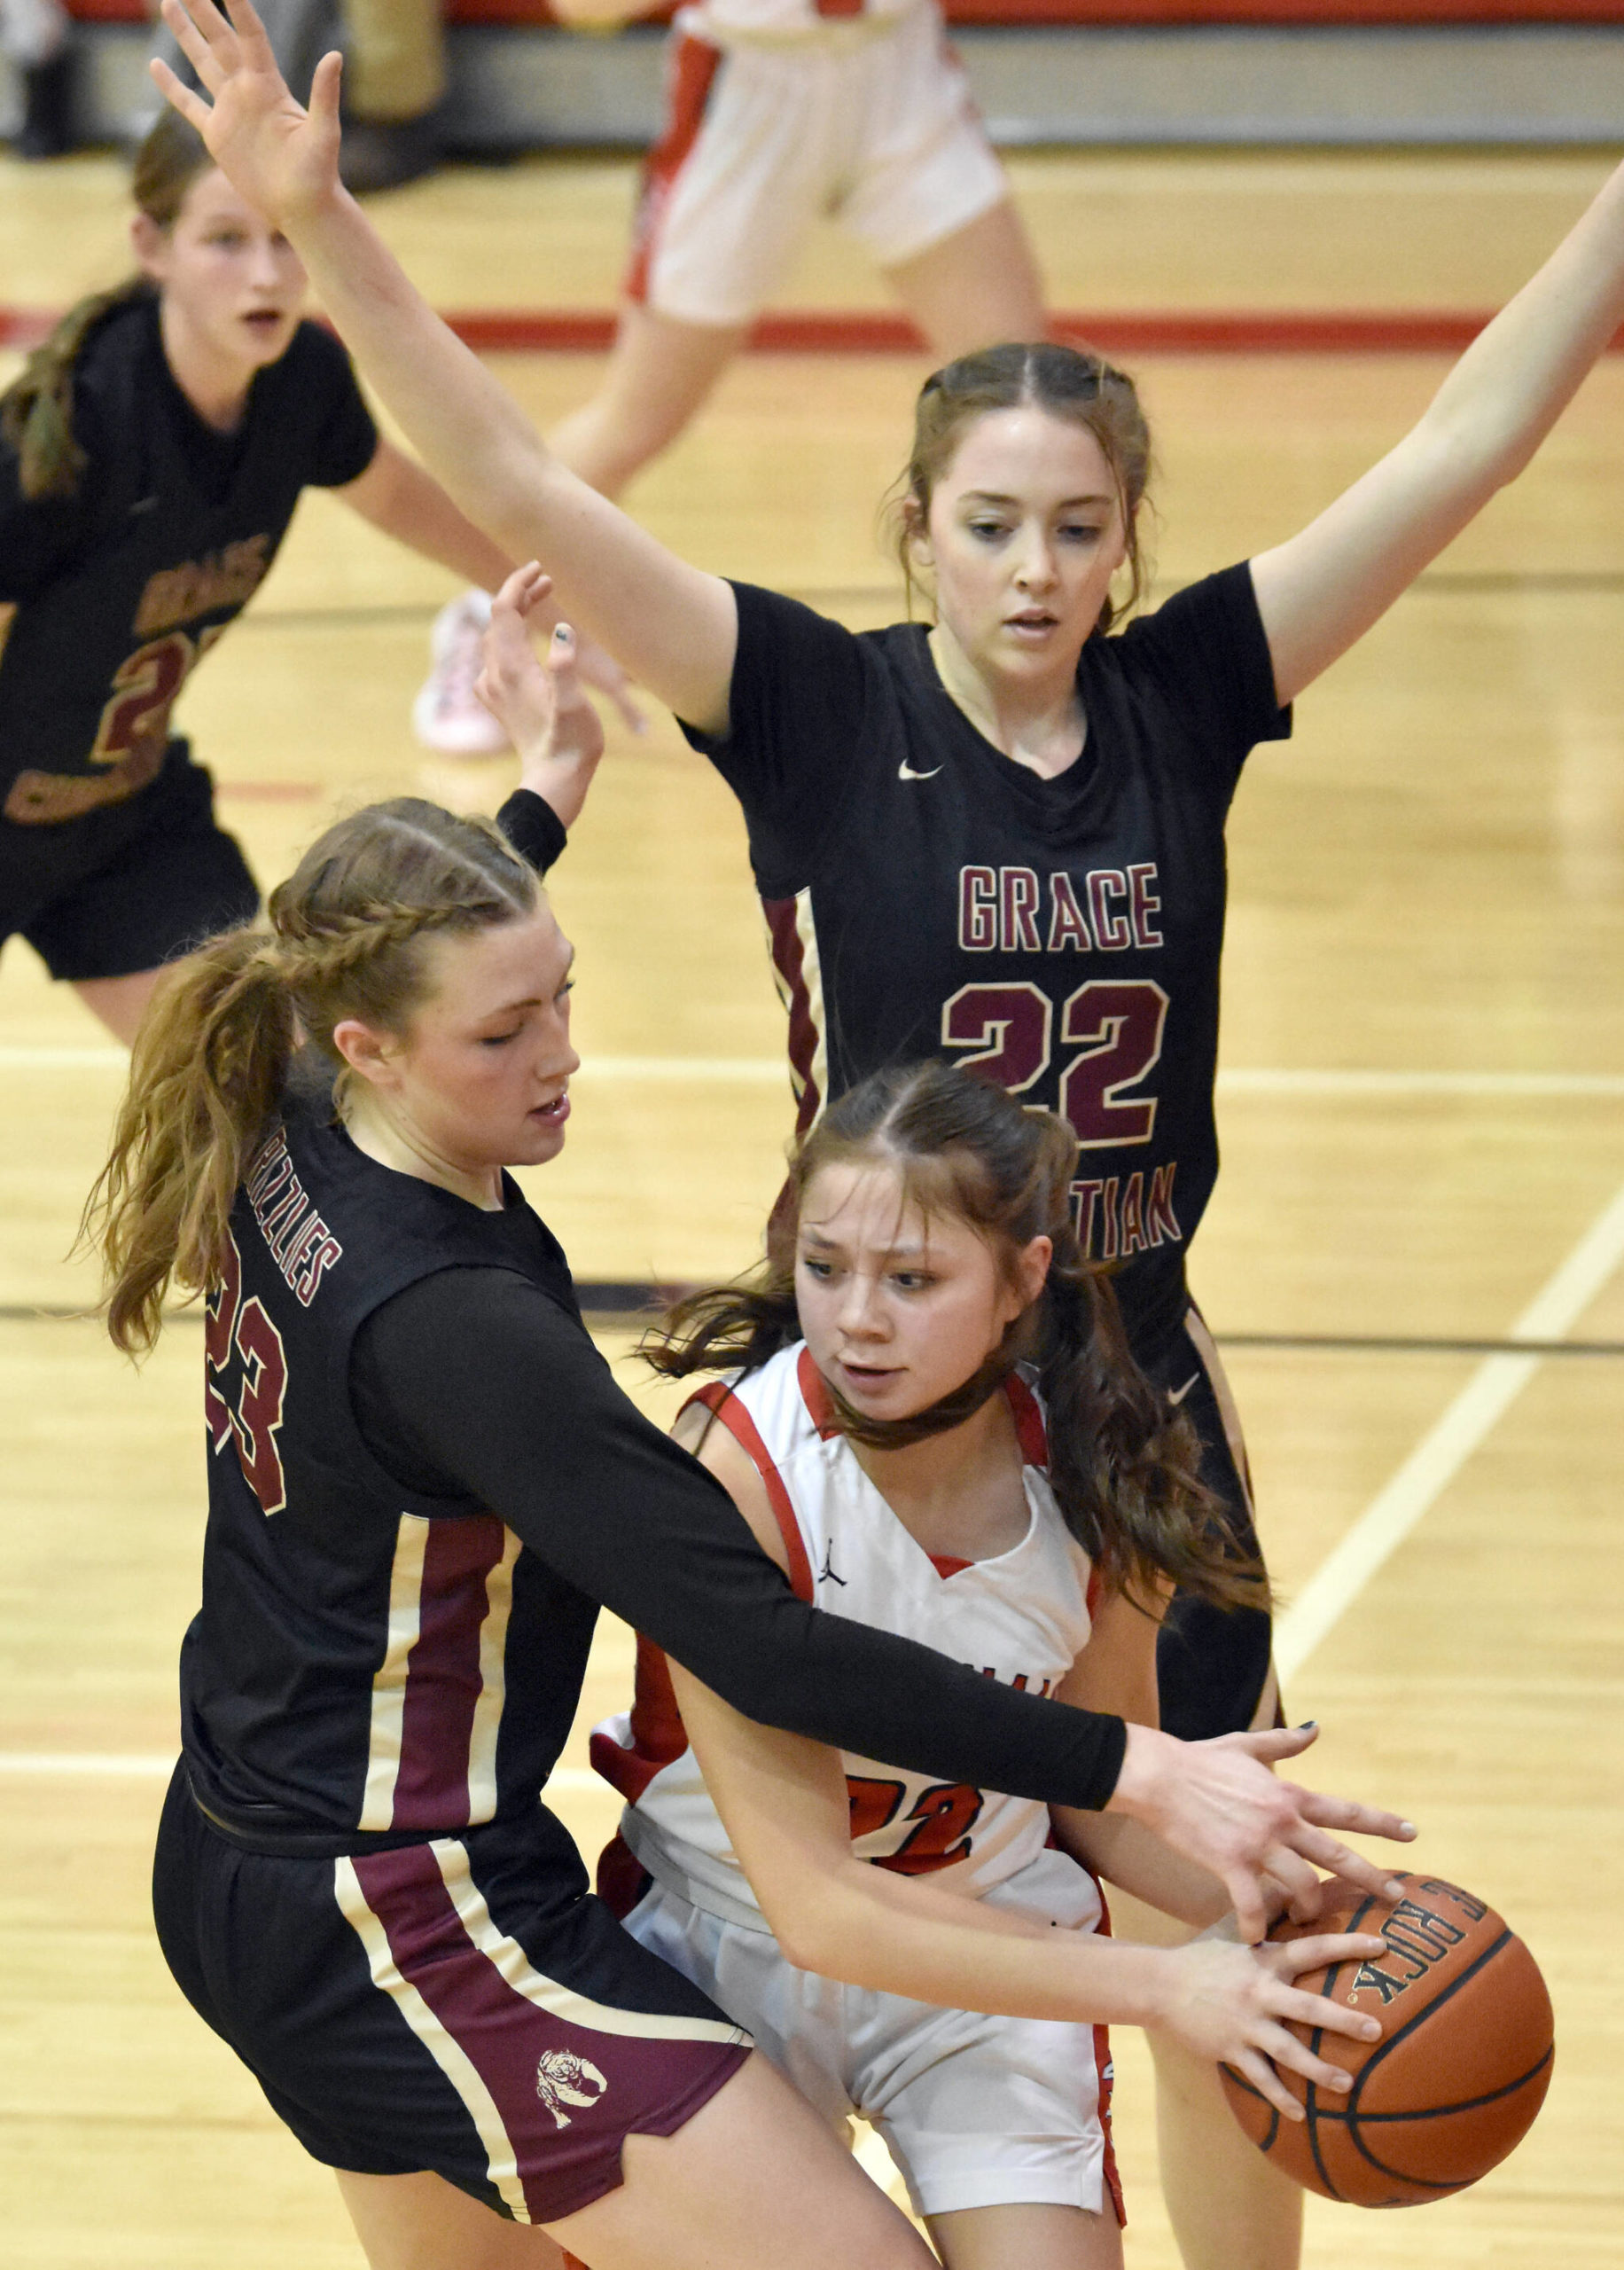 Kenai Central’s Emilee Wilson looks to escape the trap of Grace Christian’s Sophie Lentfer and Olivia Jones on Friday, March 3, 2023, at Kenai Central High School in Kenai, Alaska. (Photo by Jeff Helminiak/Peninsula Clarion)